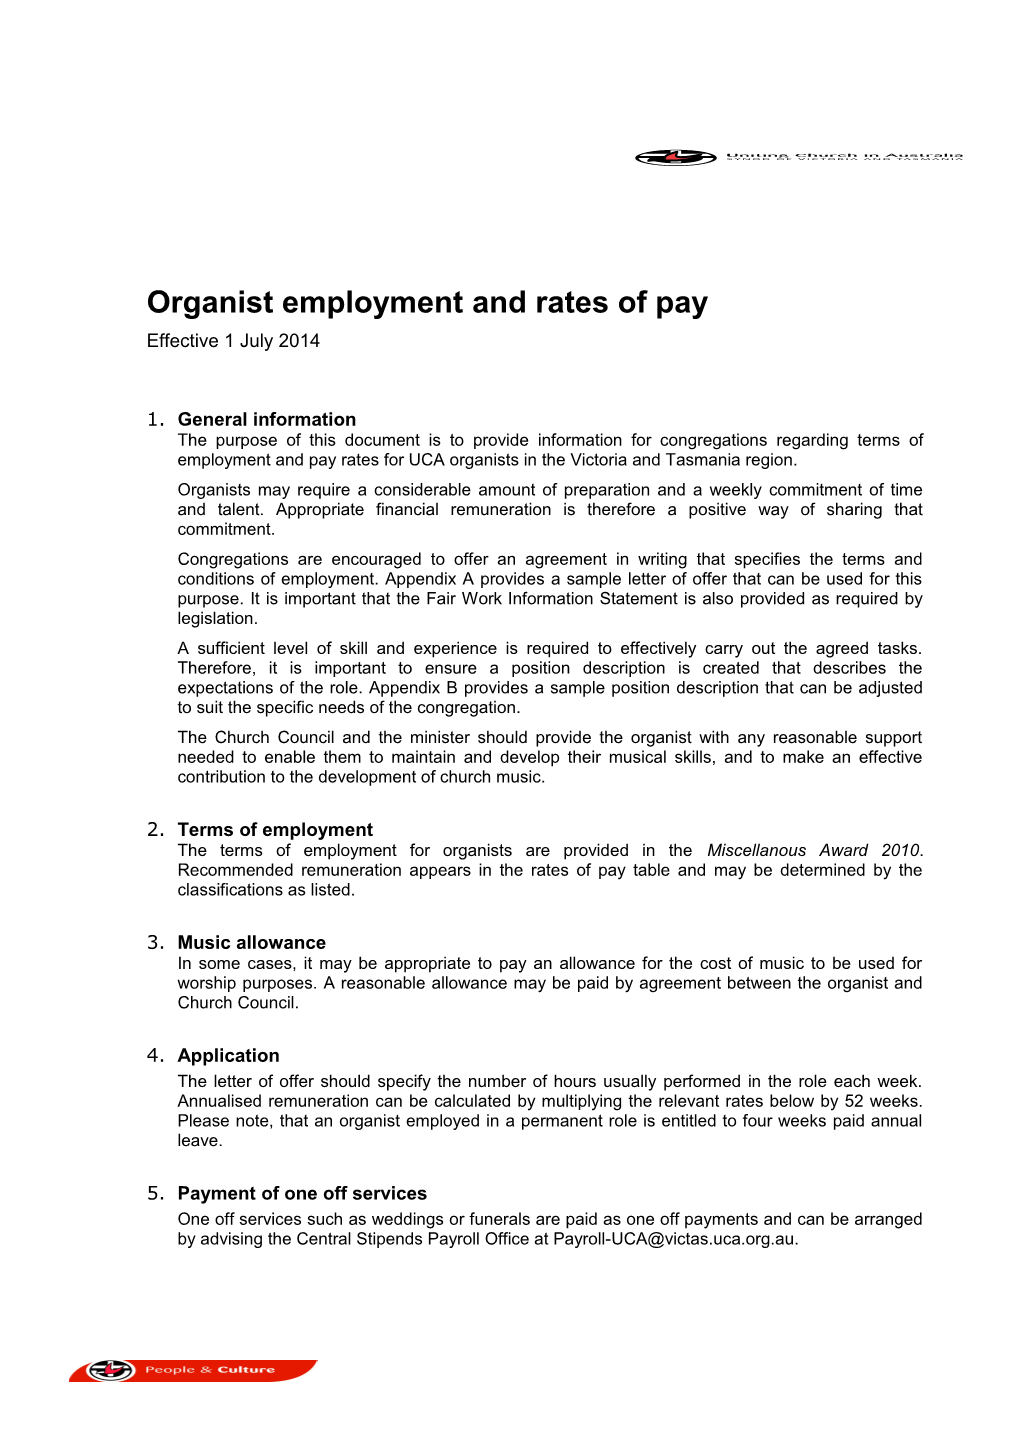 Organist Employment and Rates of Pay